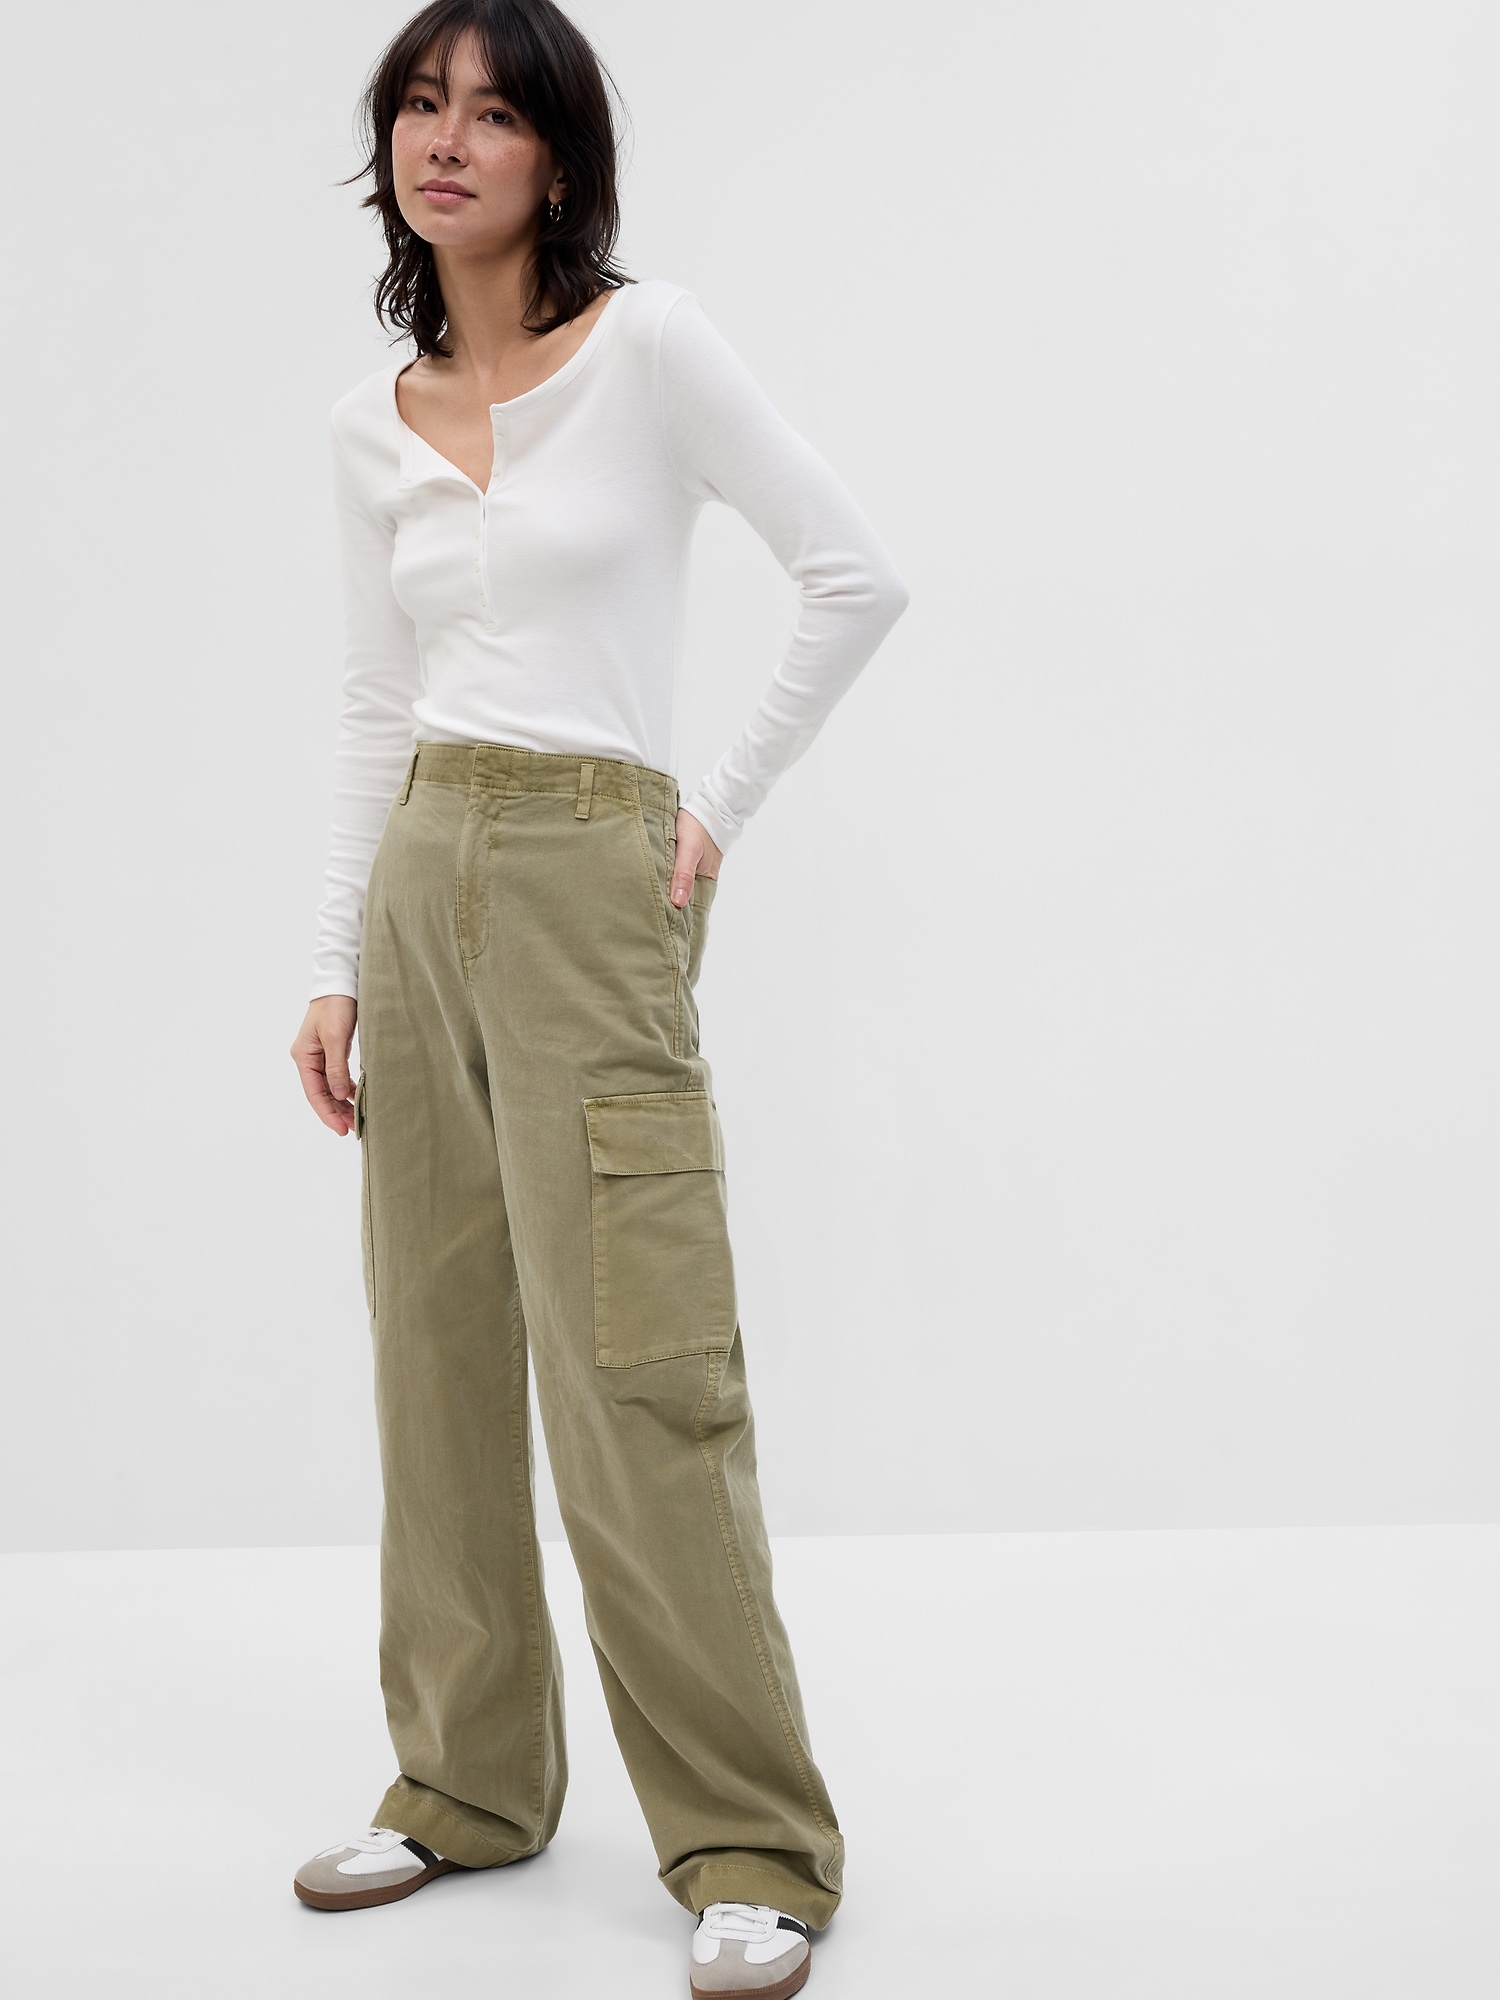 Buy Gap Loose Khaki Trousers from the Gap online shop